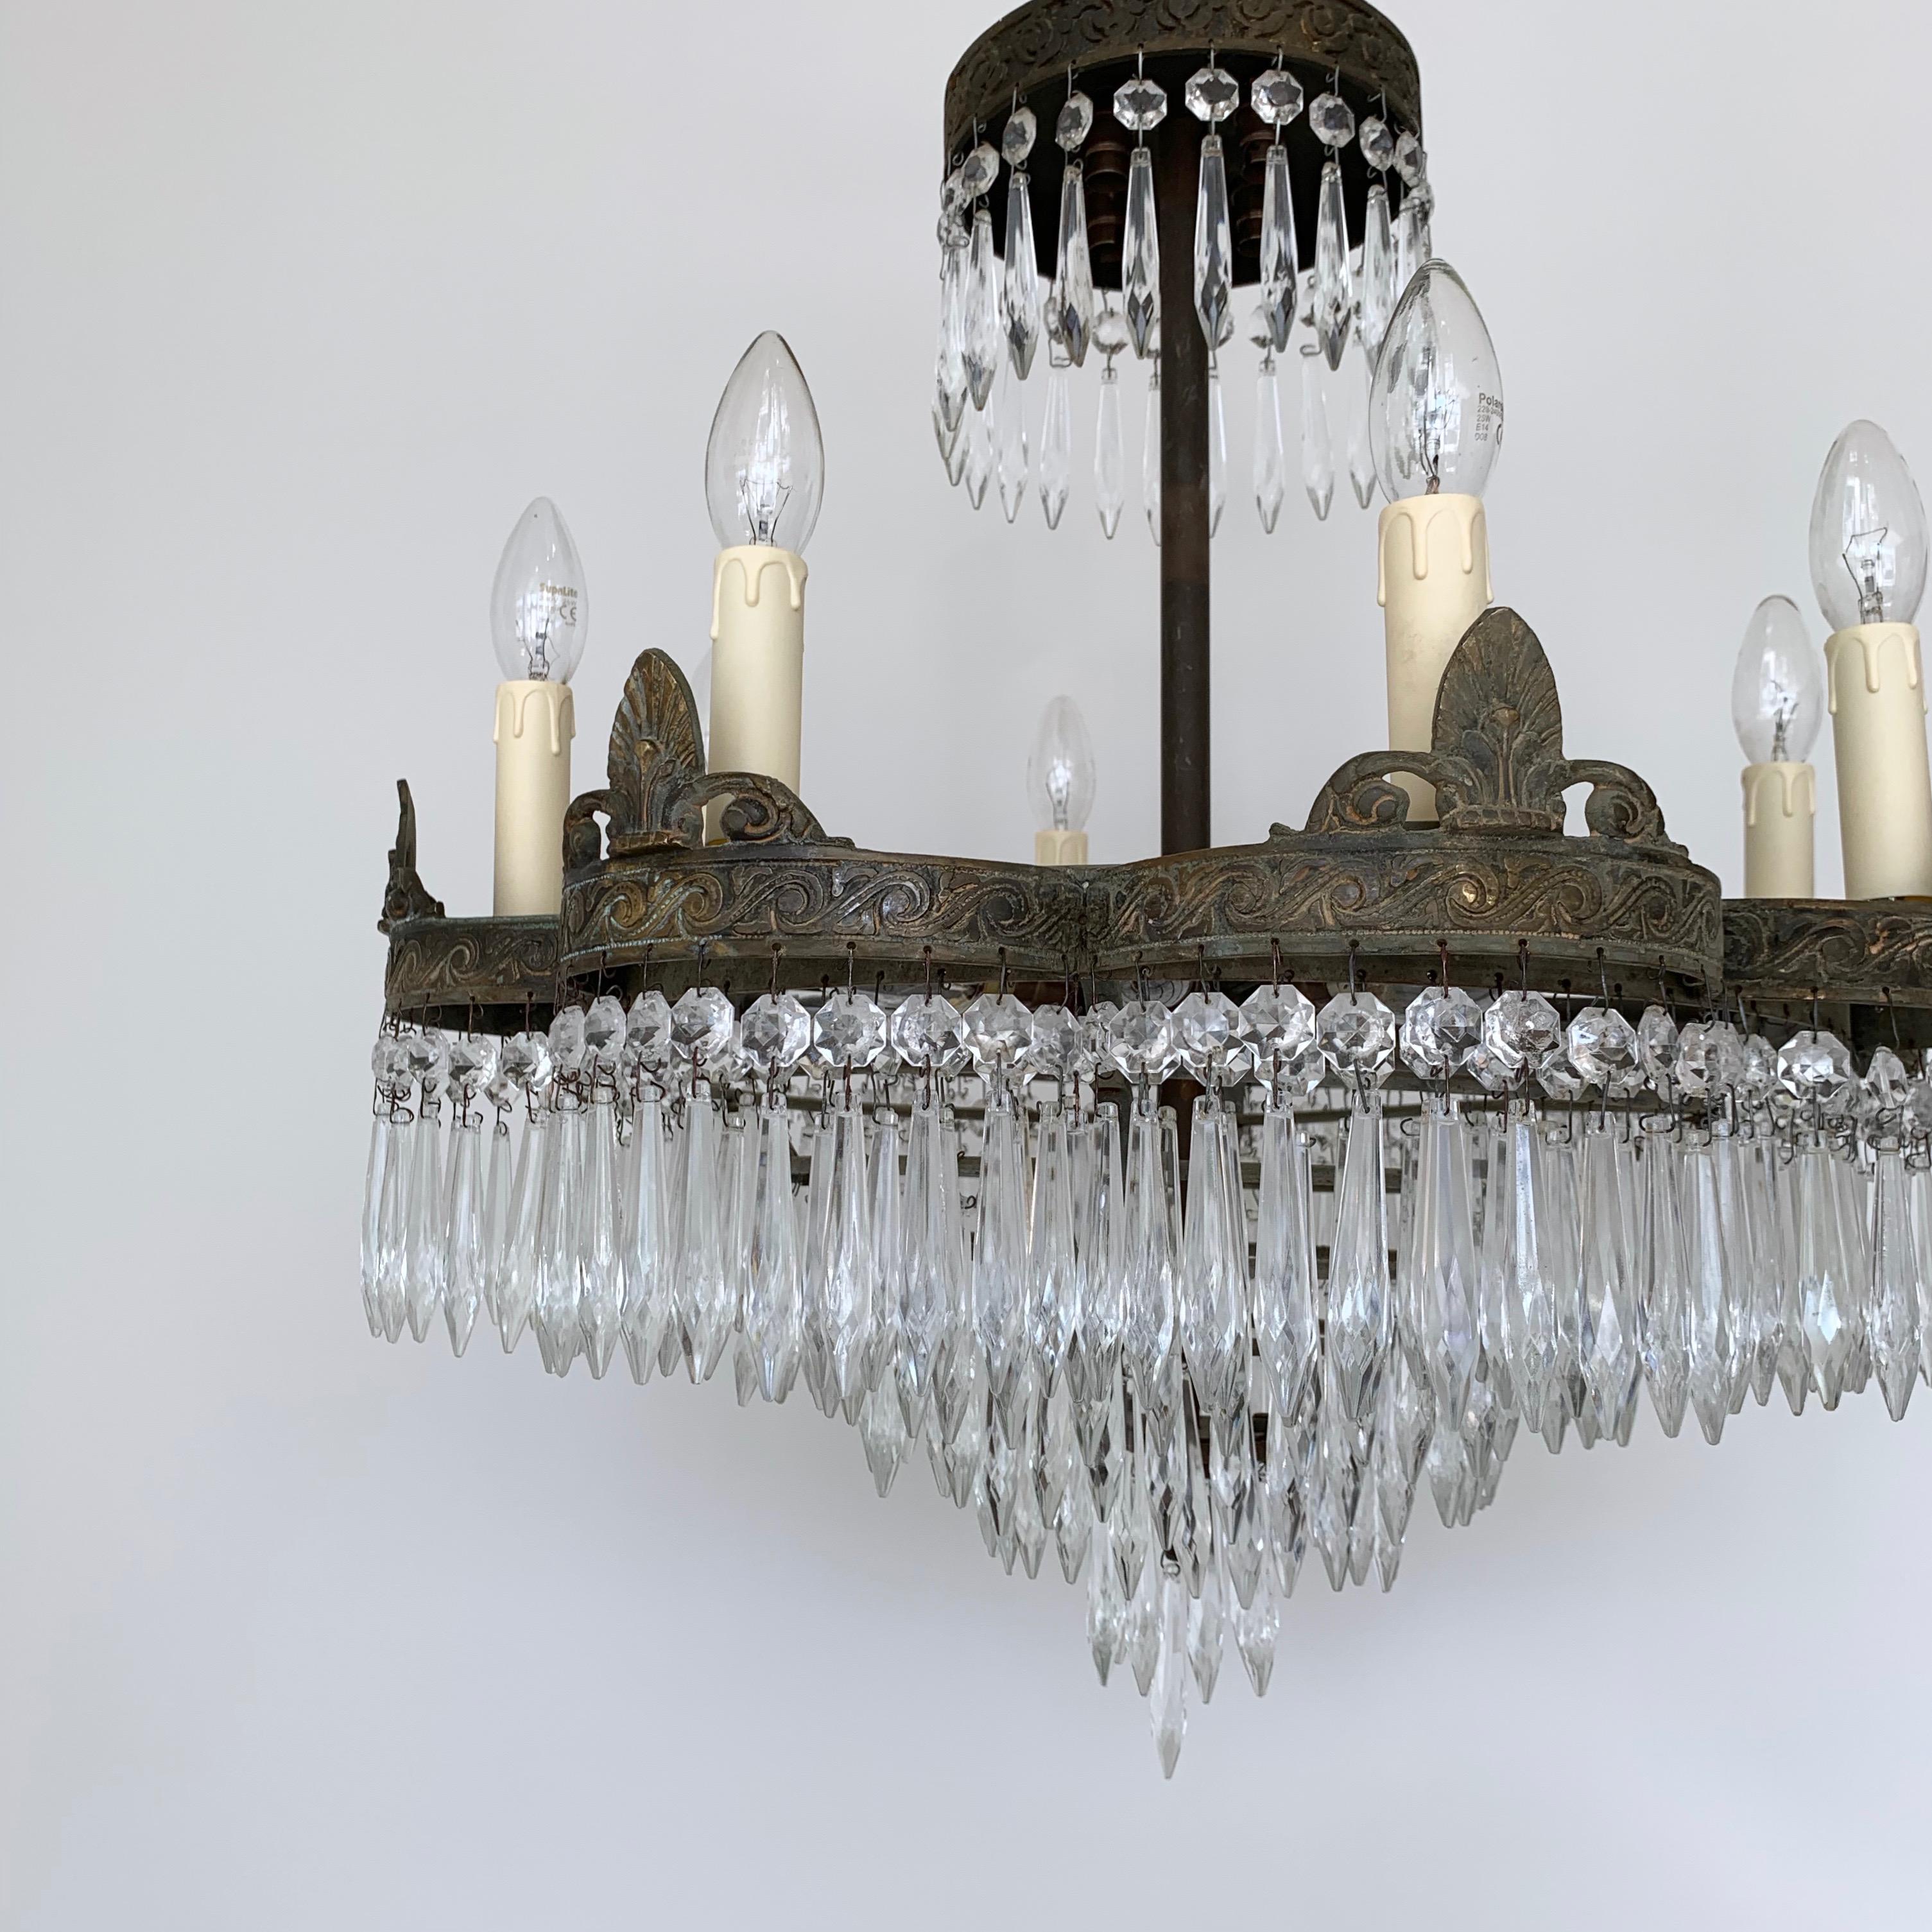 Early 1900s French Waterfall Petal Frame Chandelier with Glass Icicle Drops For Sale 2